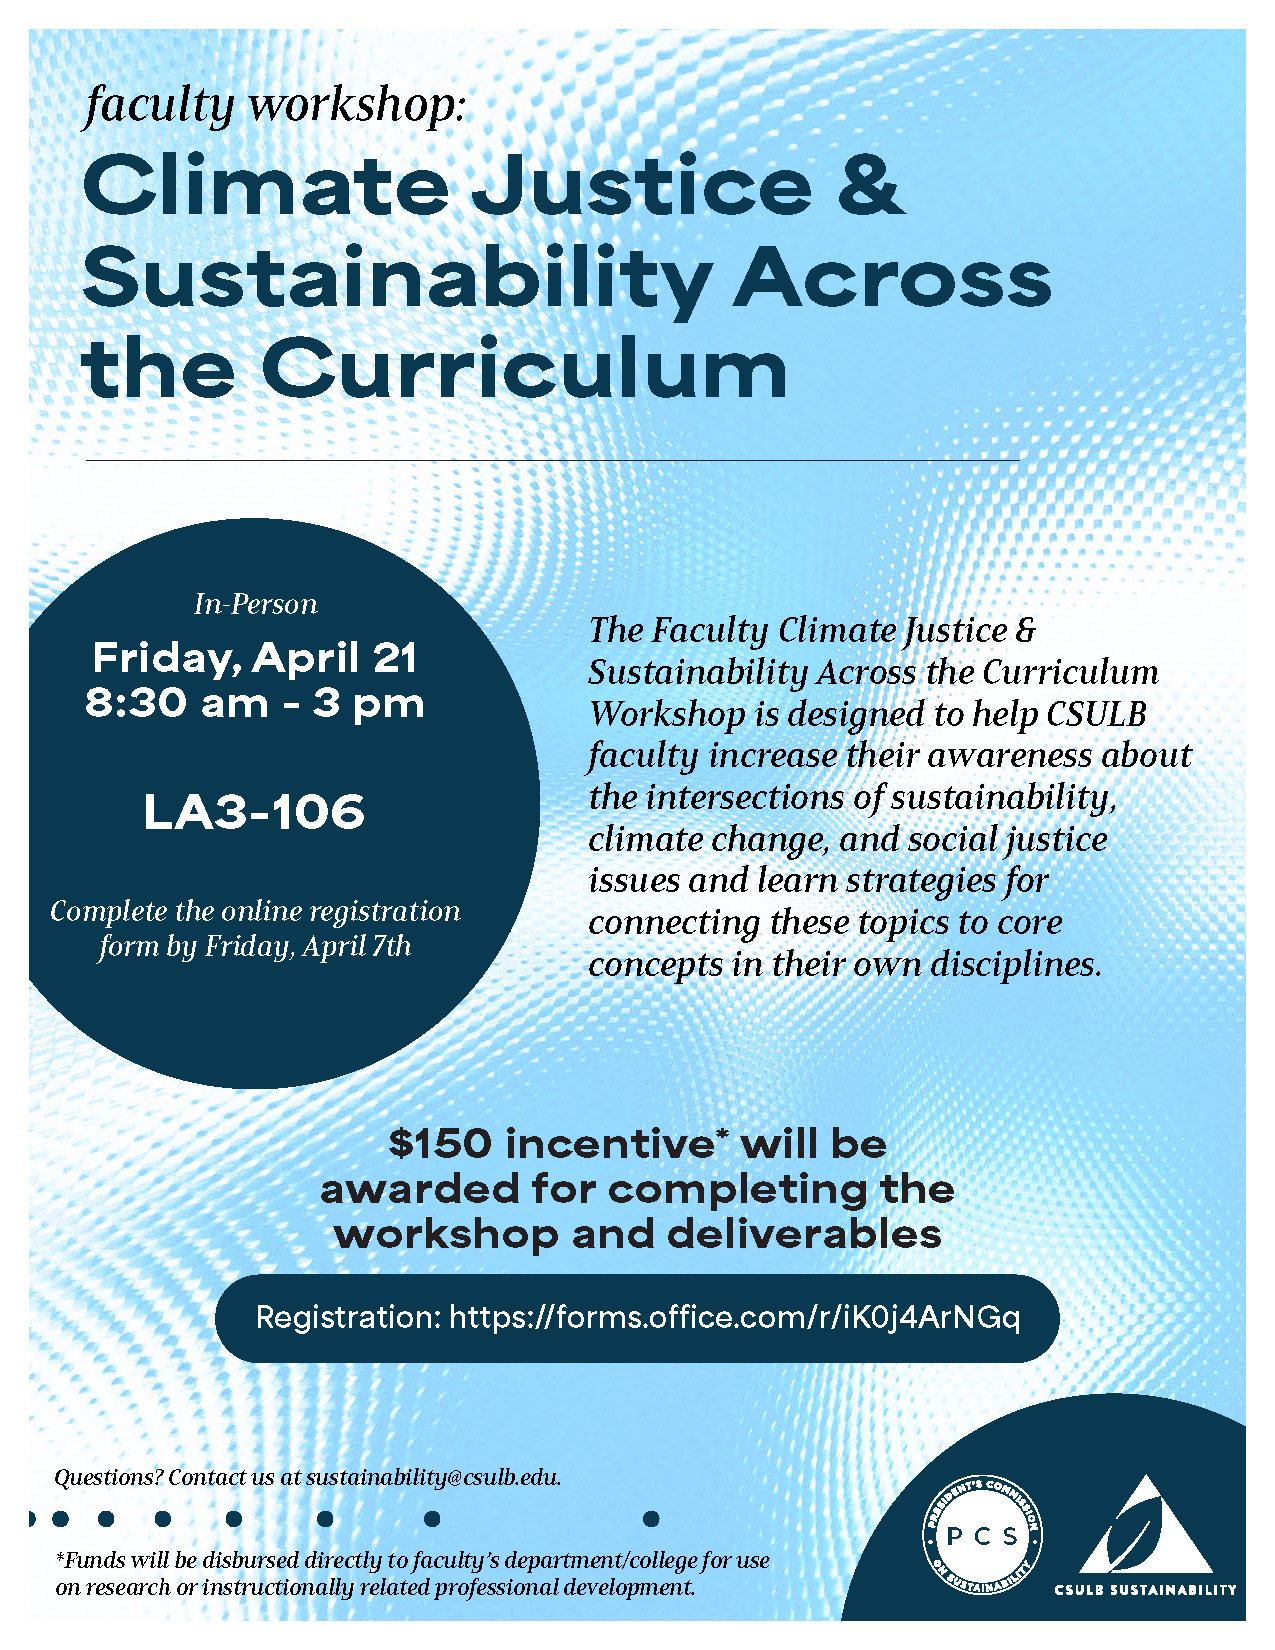 Climate Justice and Sustainability Curriculum Workshop Flyer